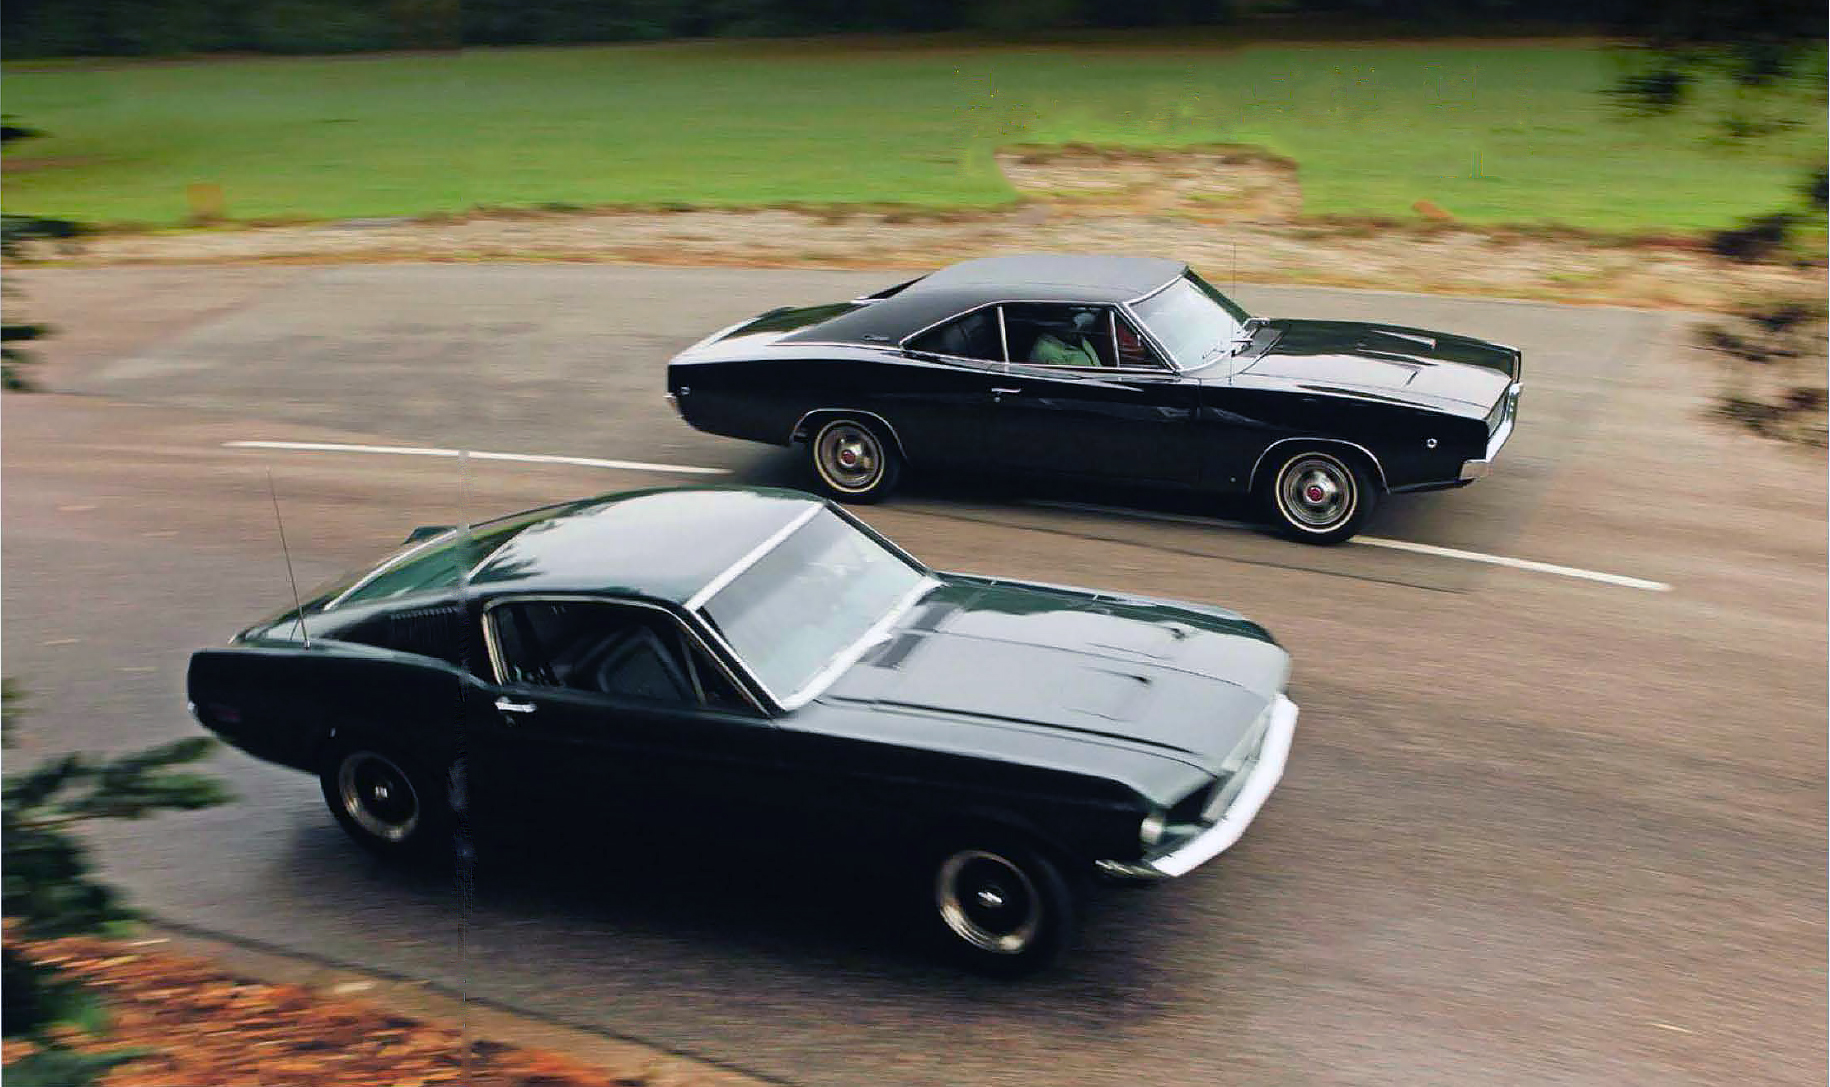 Ford-Mustang-390GT-vs-Dodge-Charger-440RT-1.jpg